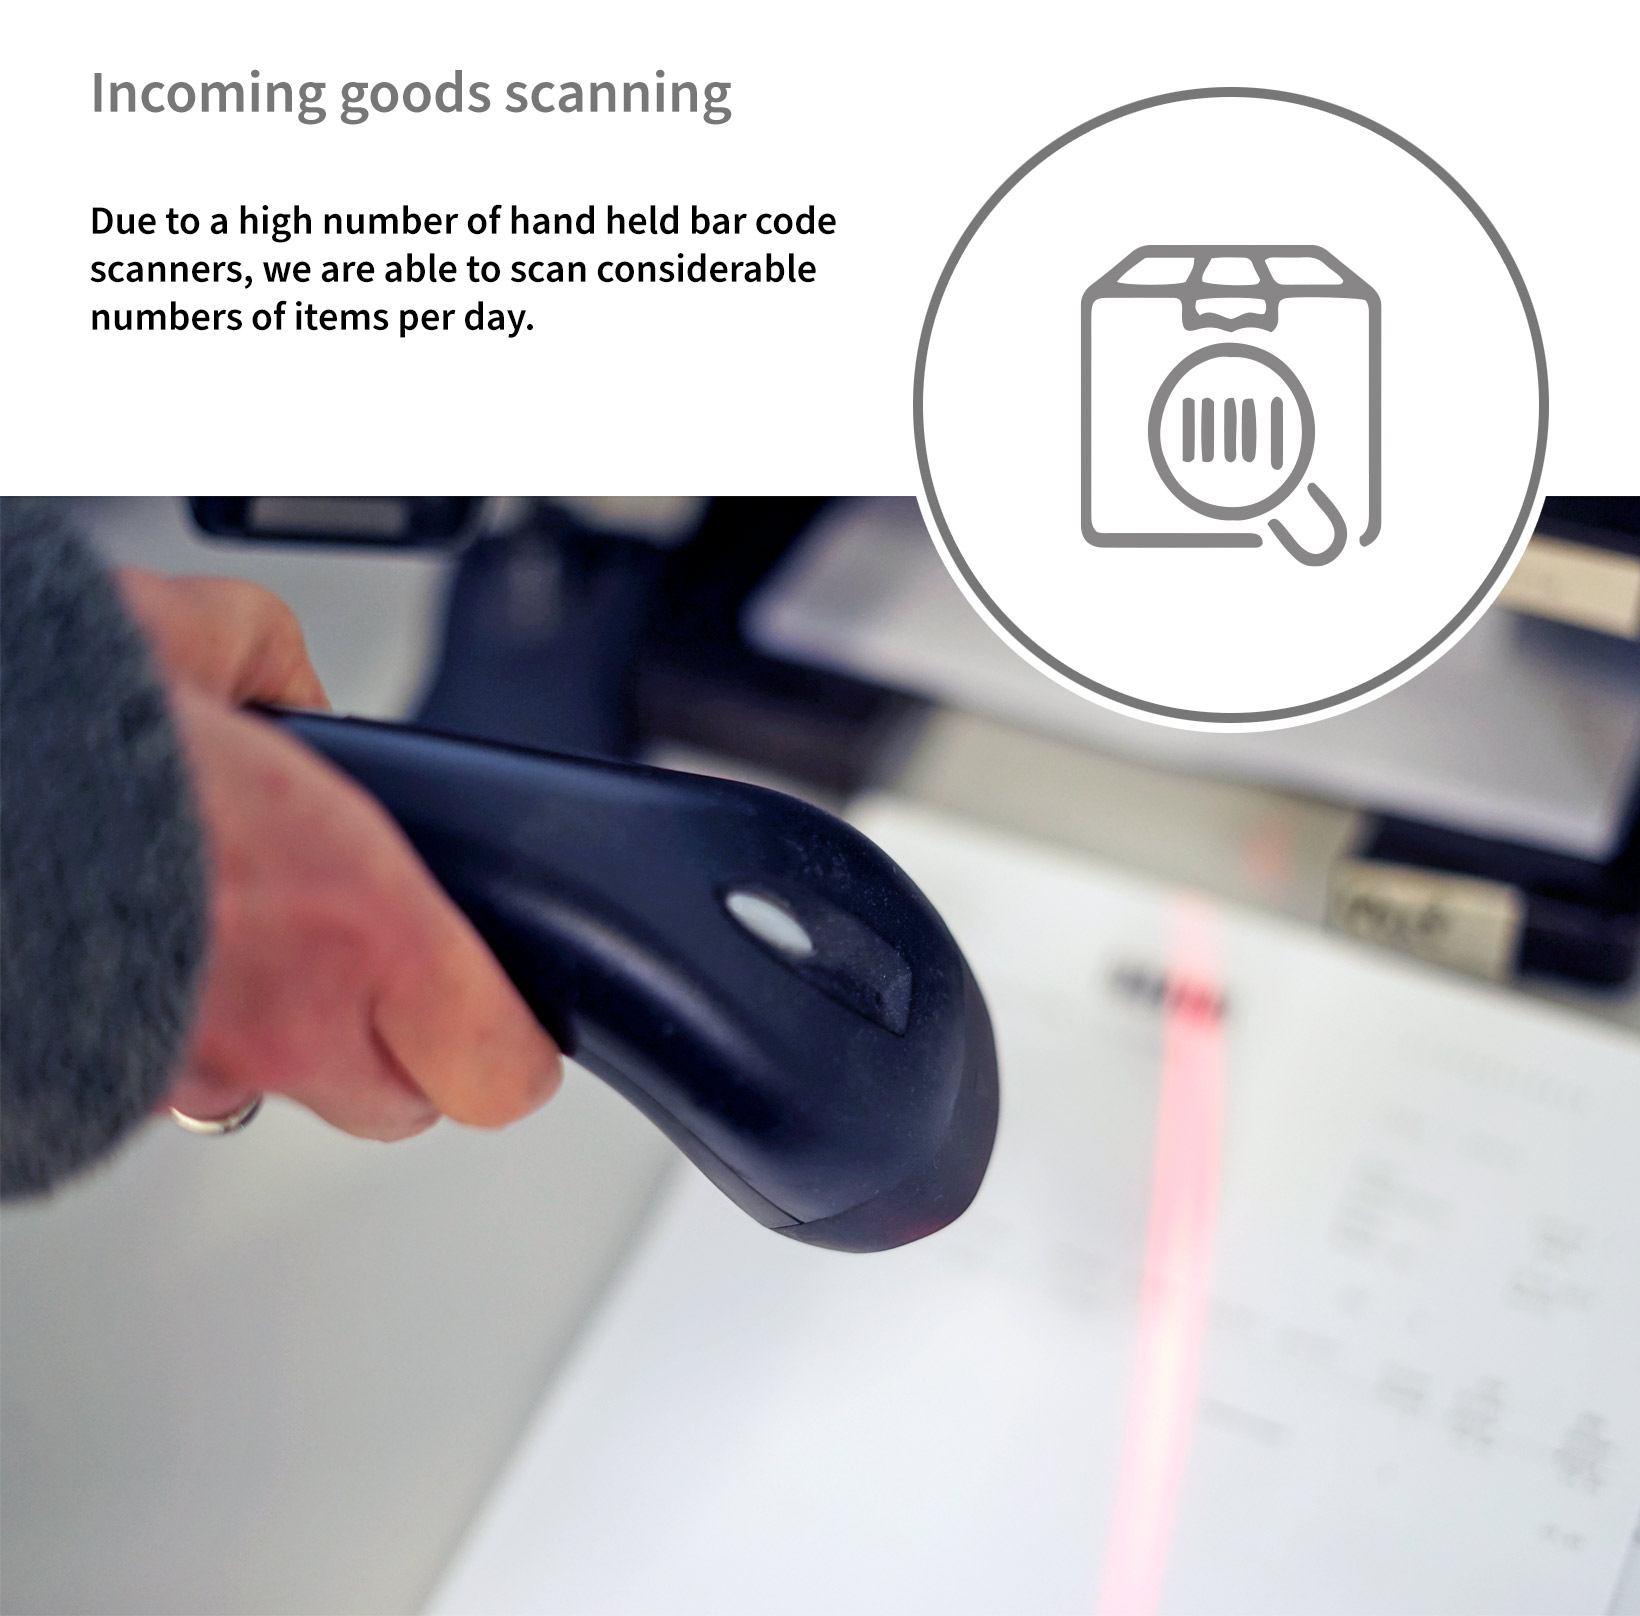 Audis - Incoming goods scanning